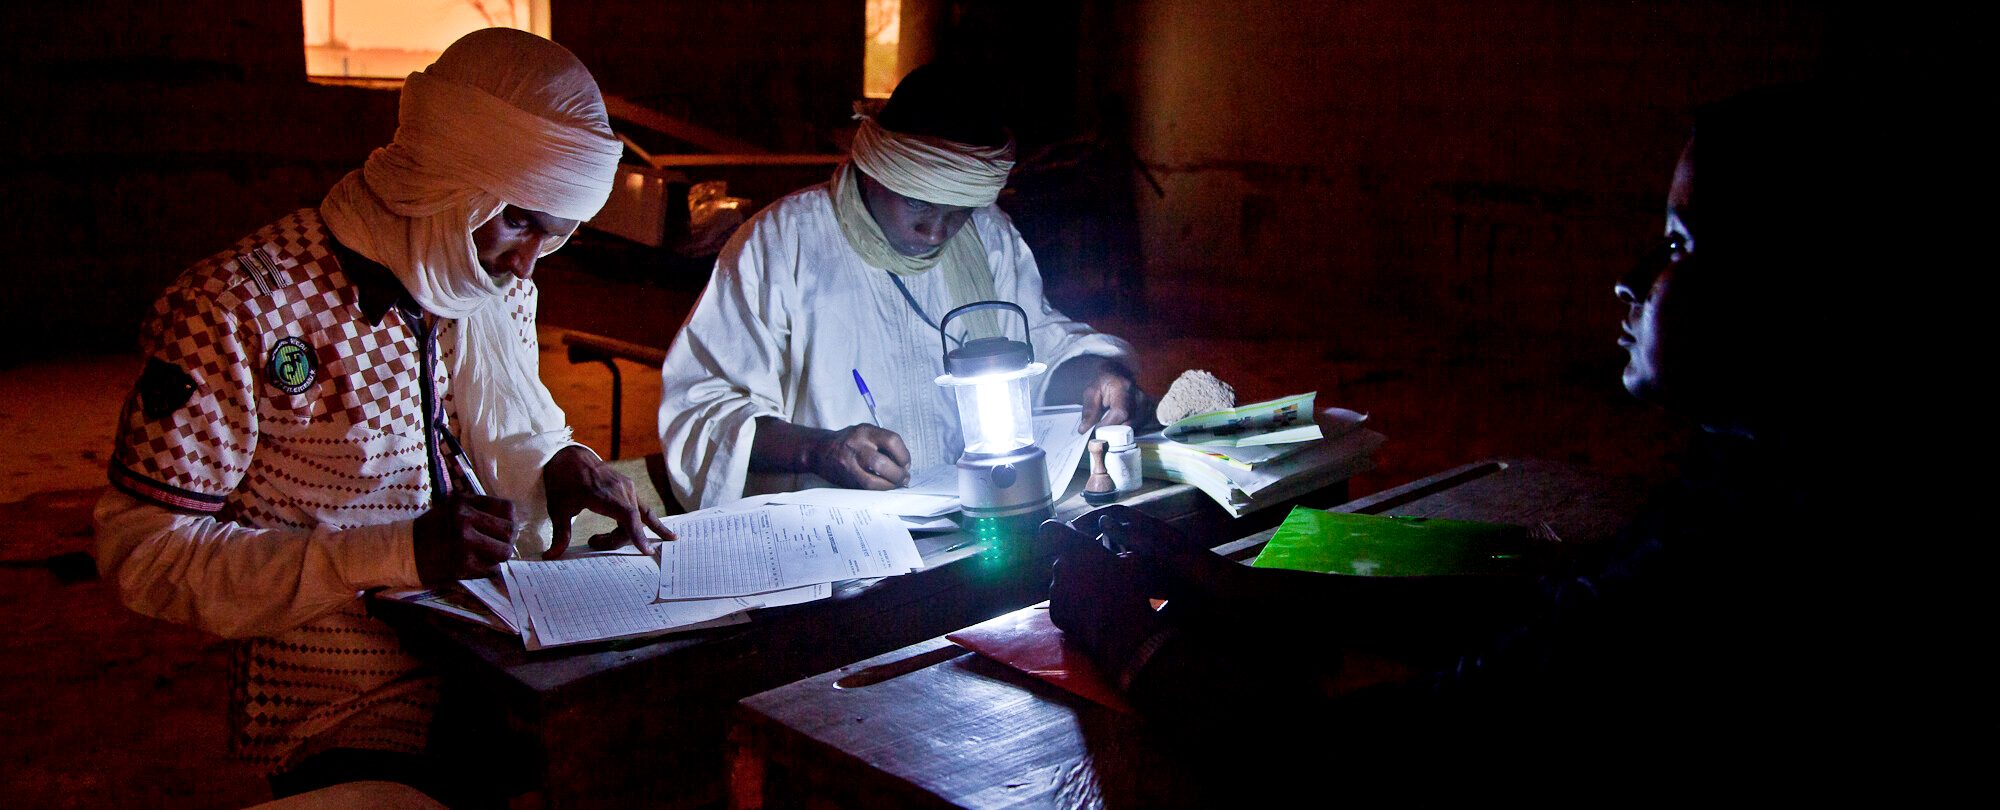 Election results in Mali being tallied by lamplight